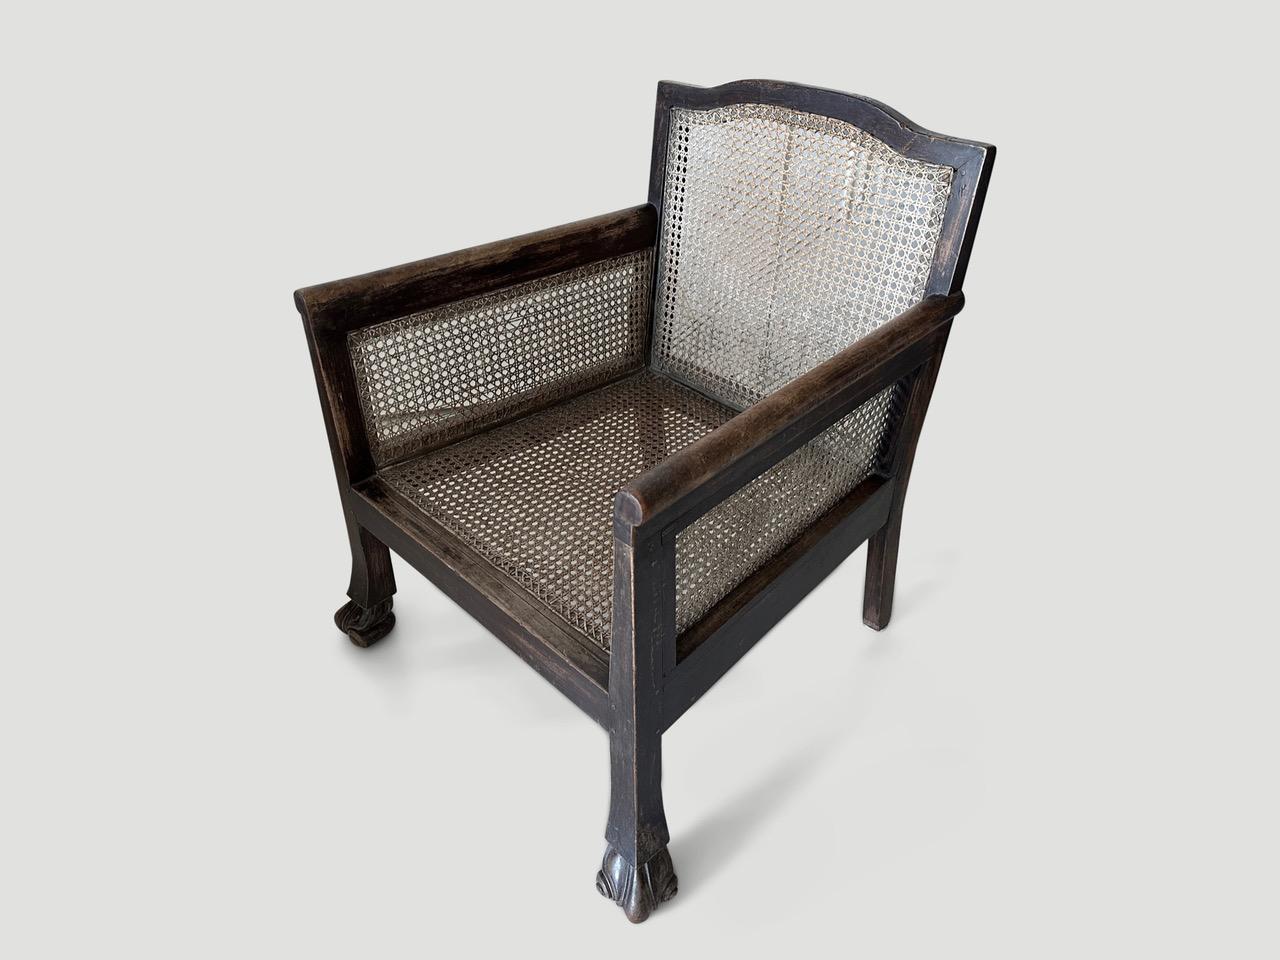 Wood Andrianna Shamaris Antique Colonial Low Chair For Sale